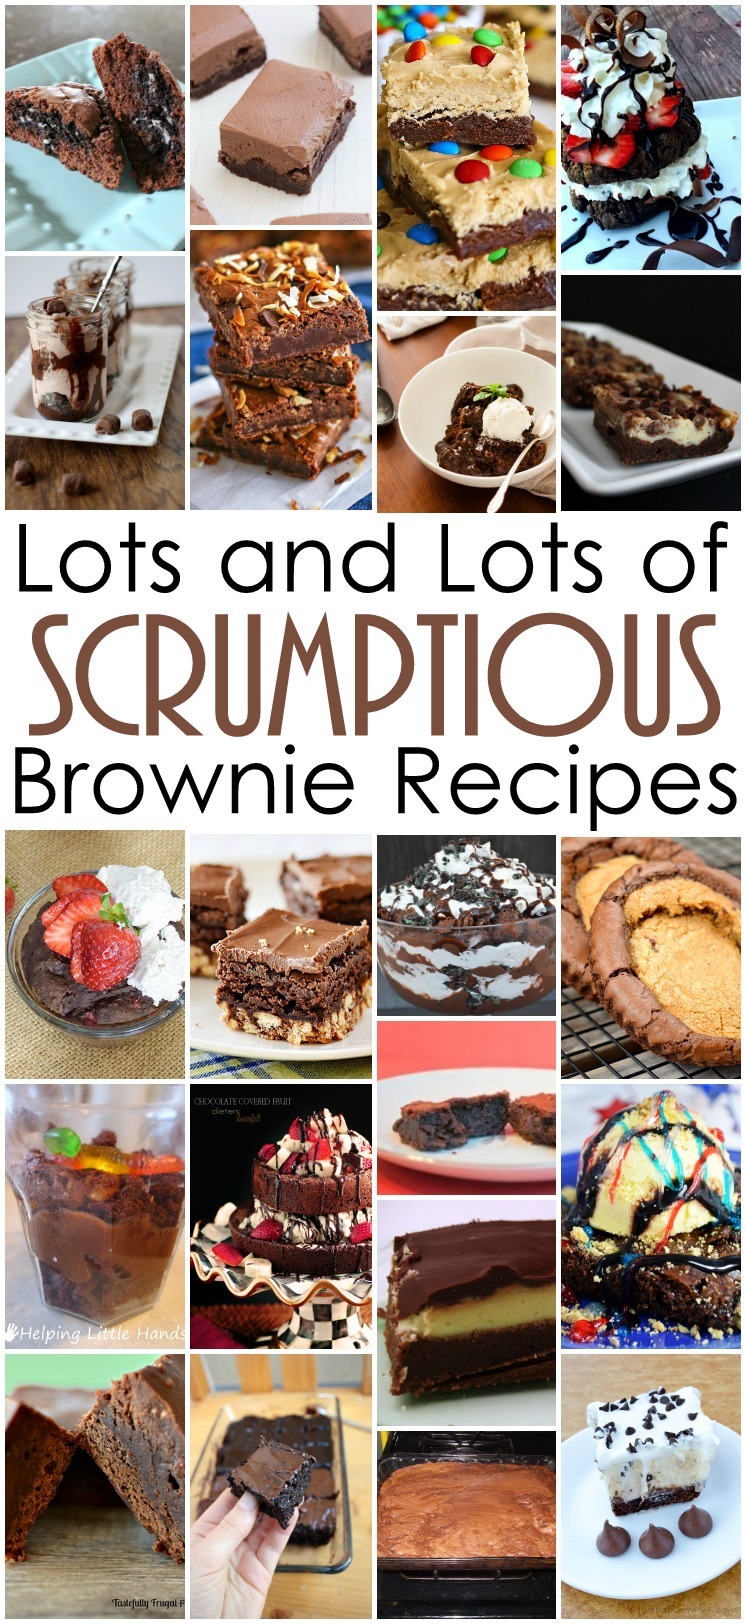 Tons of easy and delicious brownie dessert recipes. All these brownies look so good.